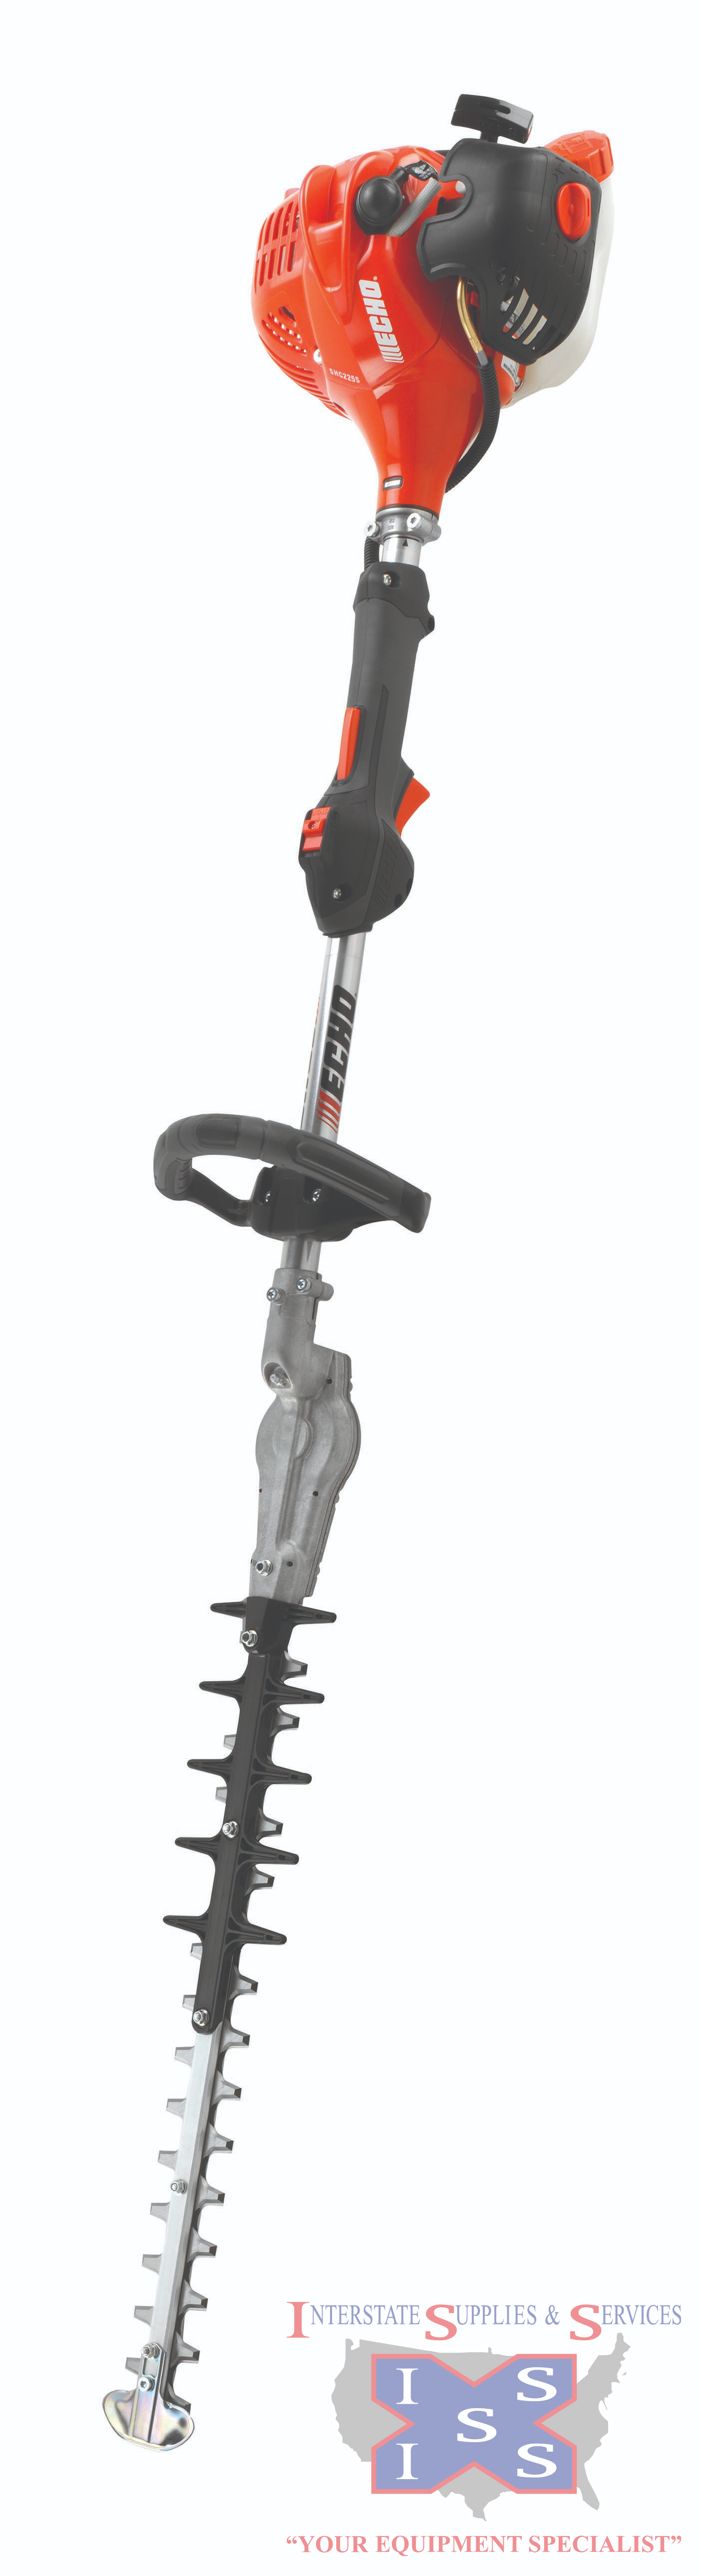 Echo SHC-225 Shafted Hedge Trimmer - Click Image to Close